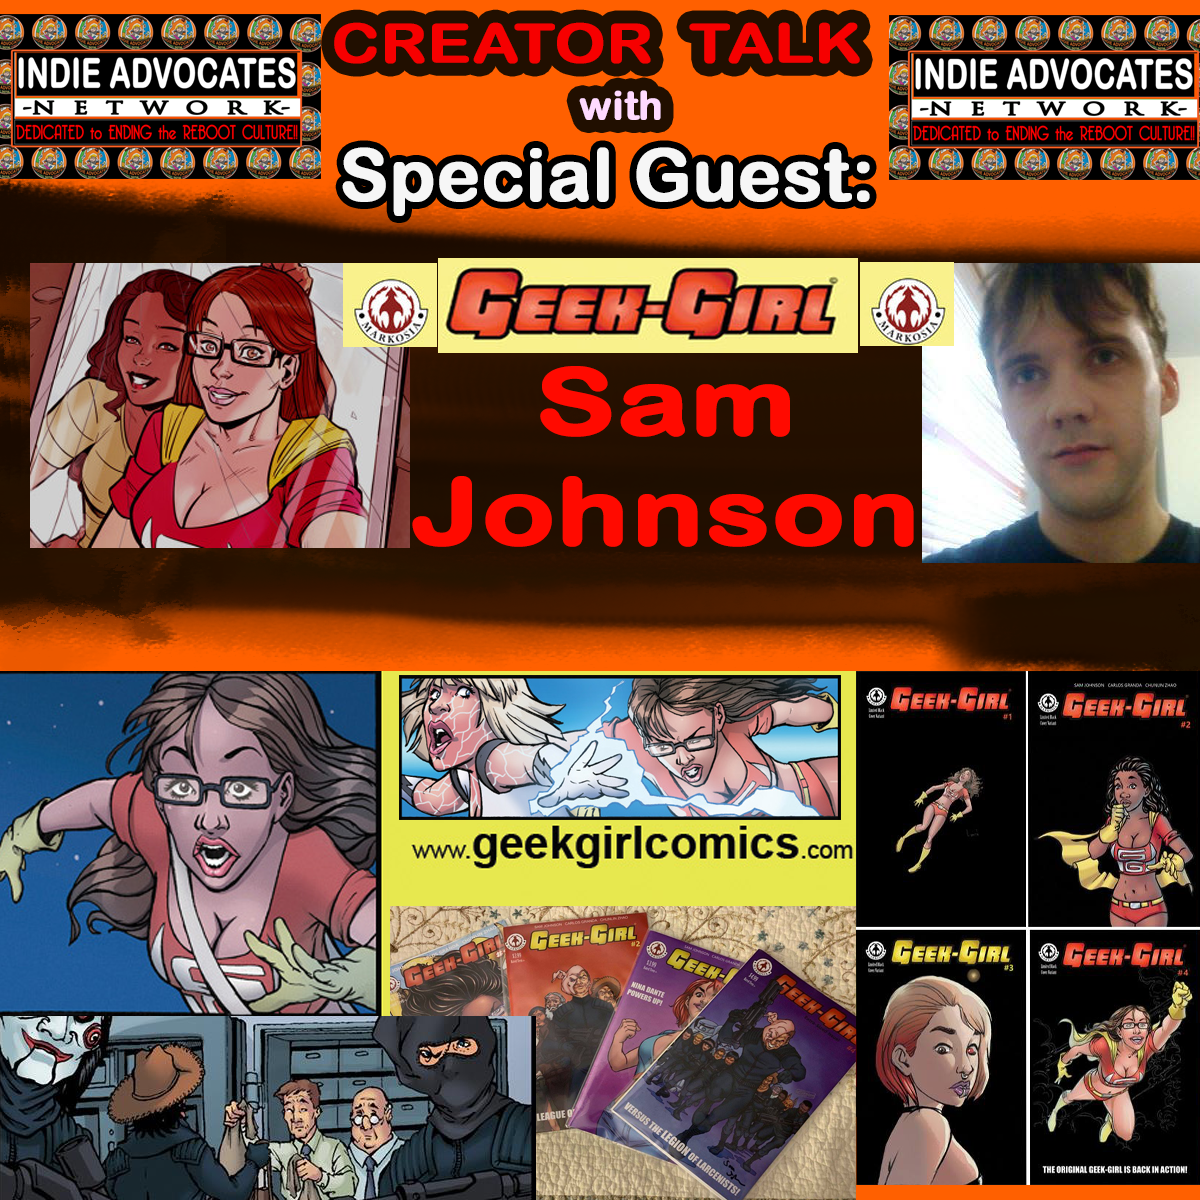 THIS IS CREATOR TALK HOSTED BY::  The INDIE Advocate FEATURING::  Geek-Girl comic book creator Sam Johnson   